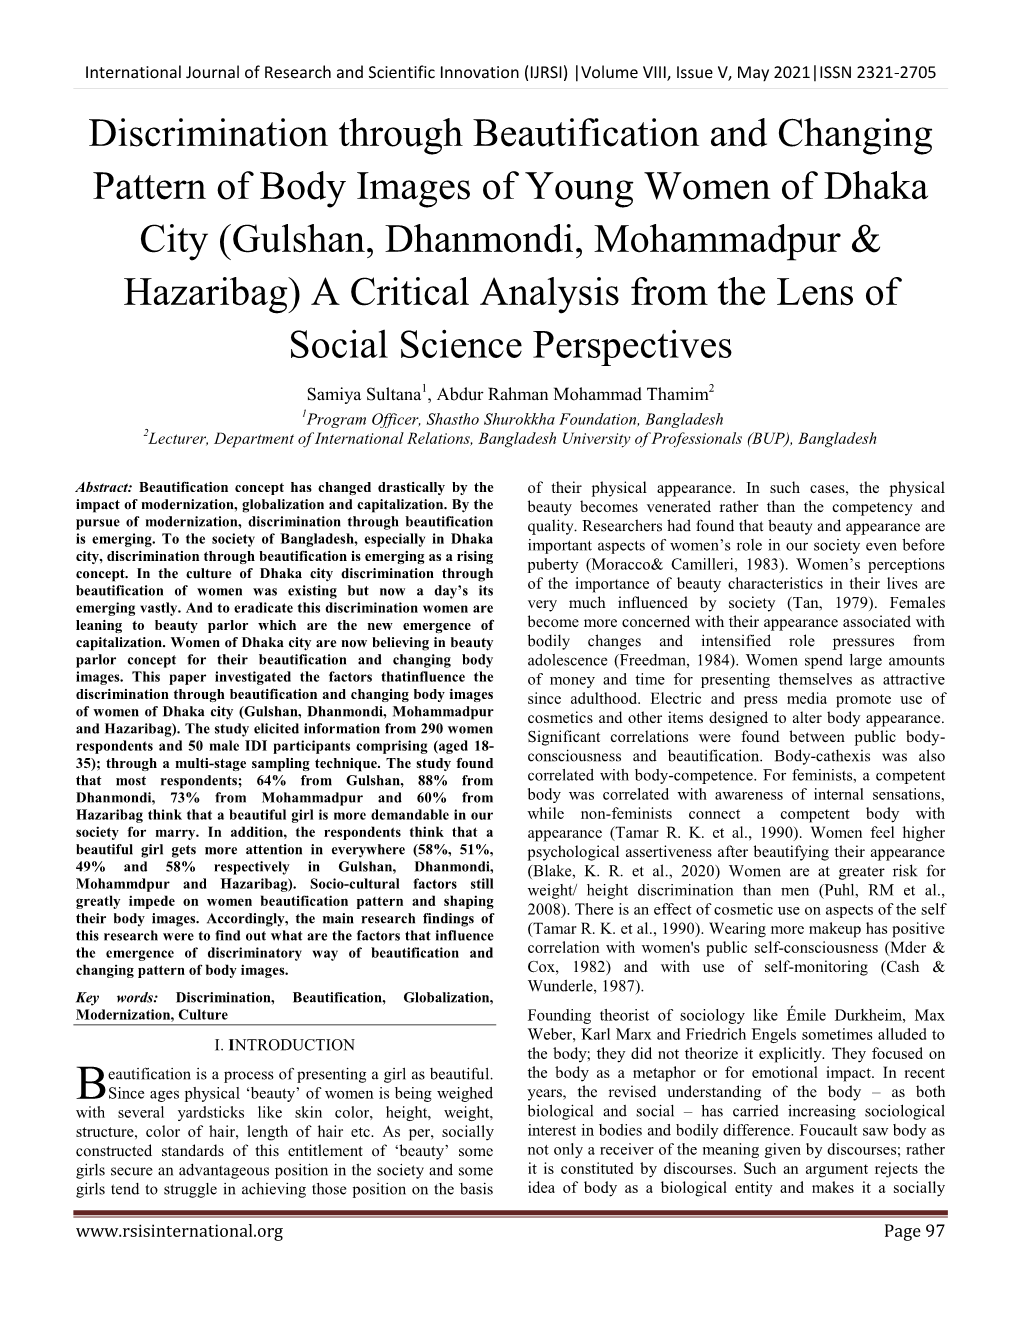 Discrimination Through Beautification and Changing Pattern of Body Images of Young Women of Dhaka City